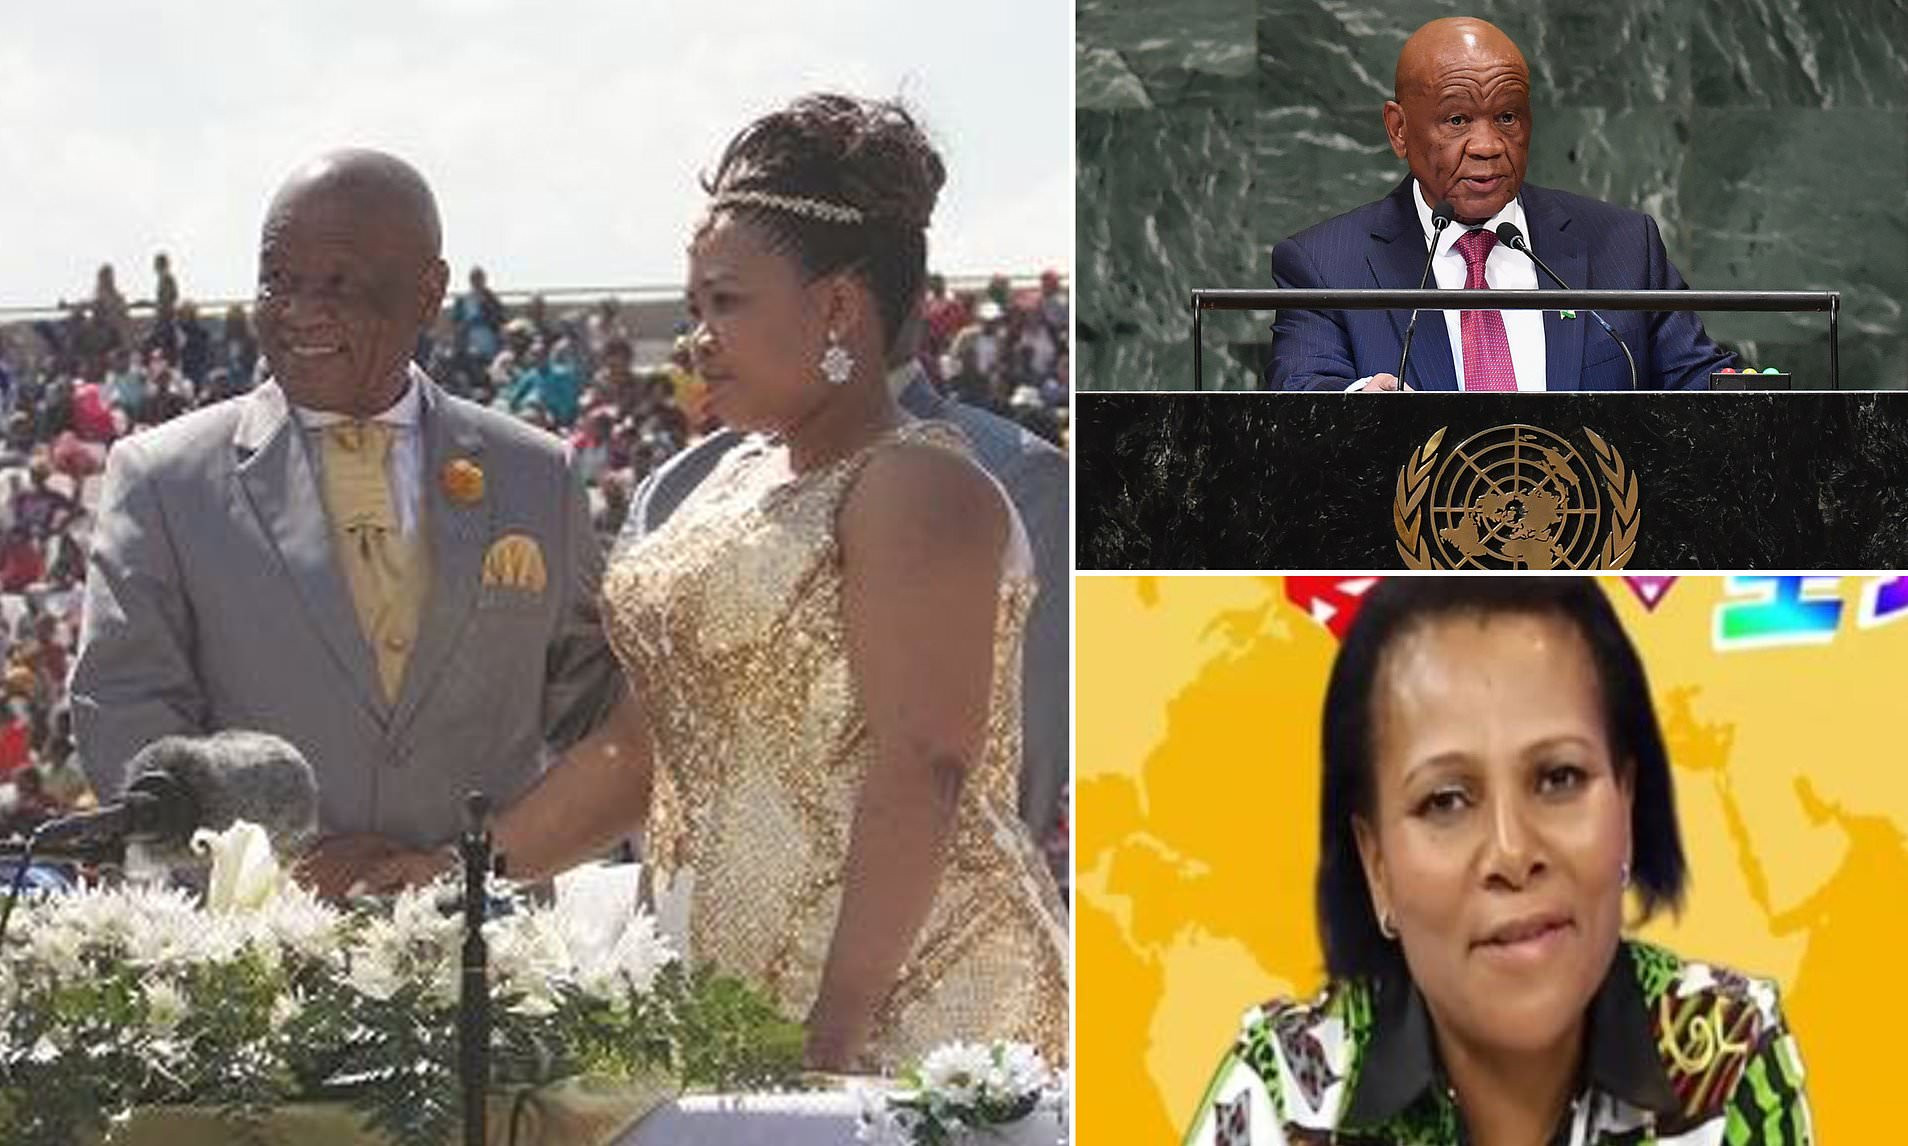 lesothos prime minister thomas thabane announces hell resign as police plans to charge him with murdering his estranged wife 2